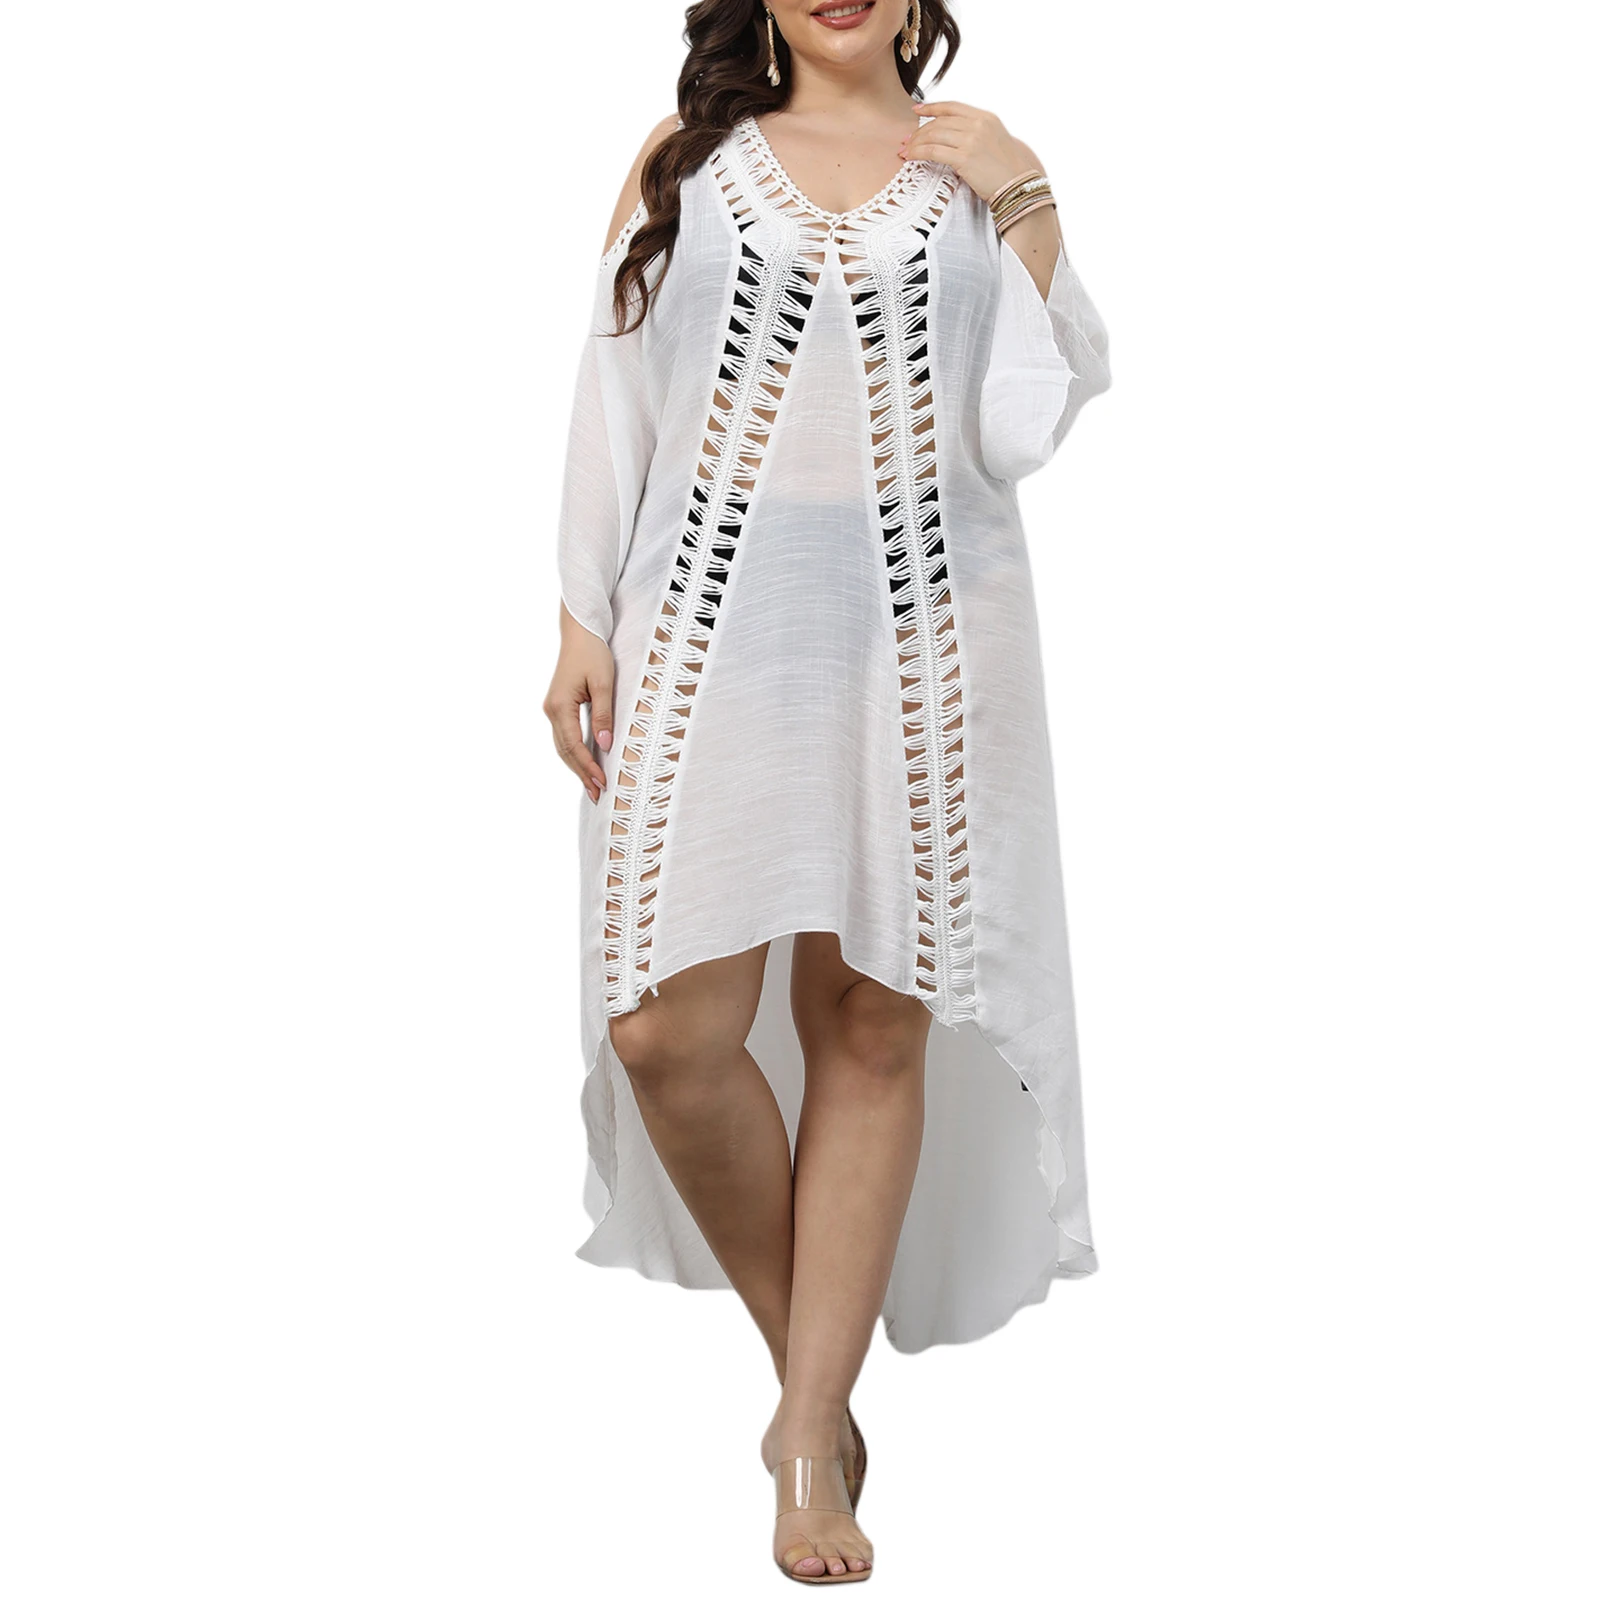 New Women Swimming Dress Plus Size Beach Cover Up Hollow Trim Loose Fit Solid Color Irregular Hem Mujer Swimwear Beachwear bathing suit coverups